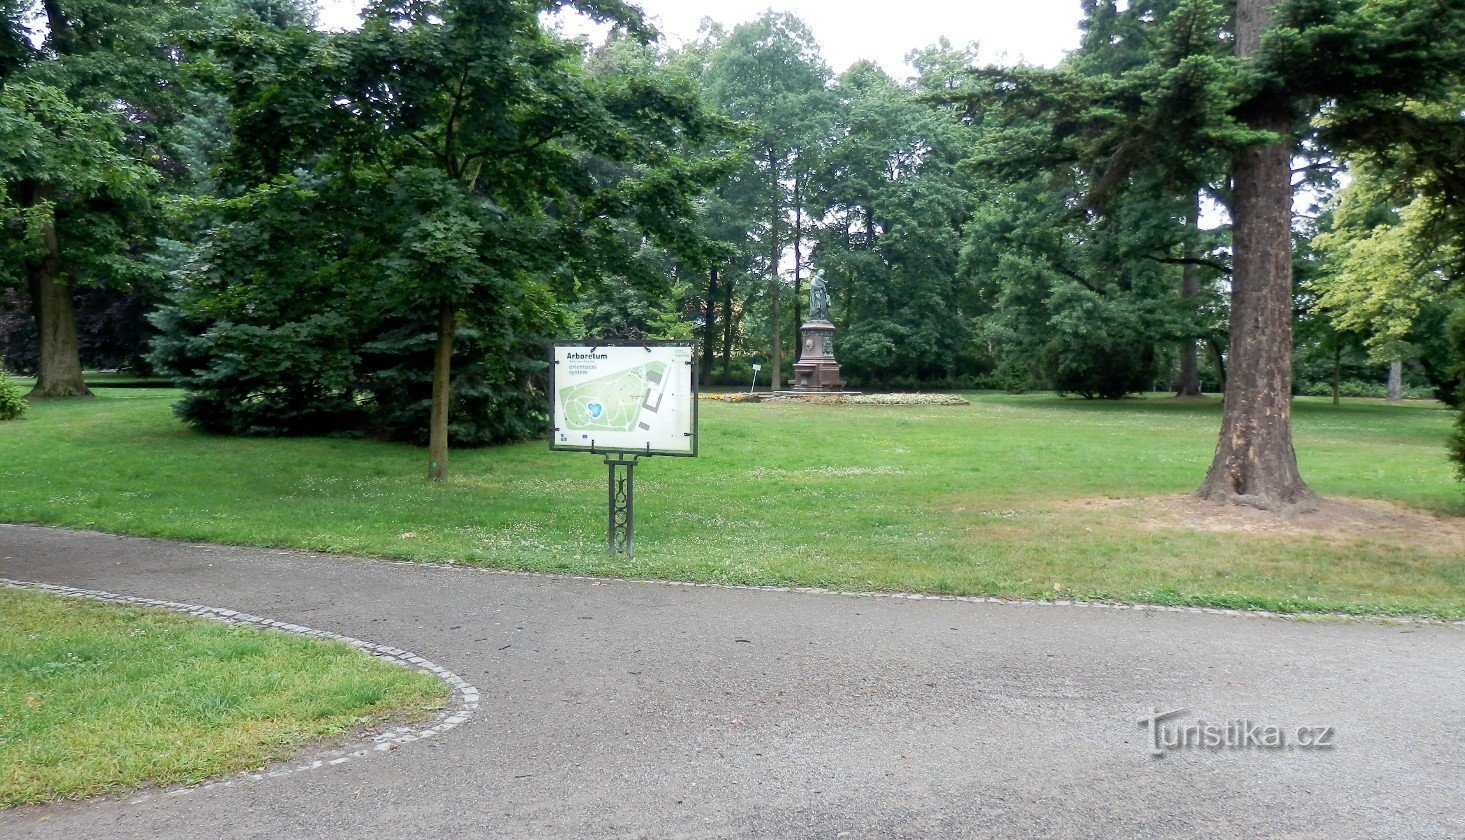 Orientation board with the designation of planted trees and bushes, in the background the sculpture of Mateřsk